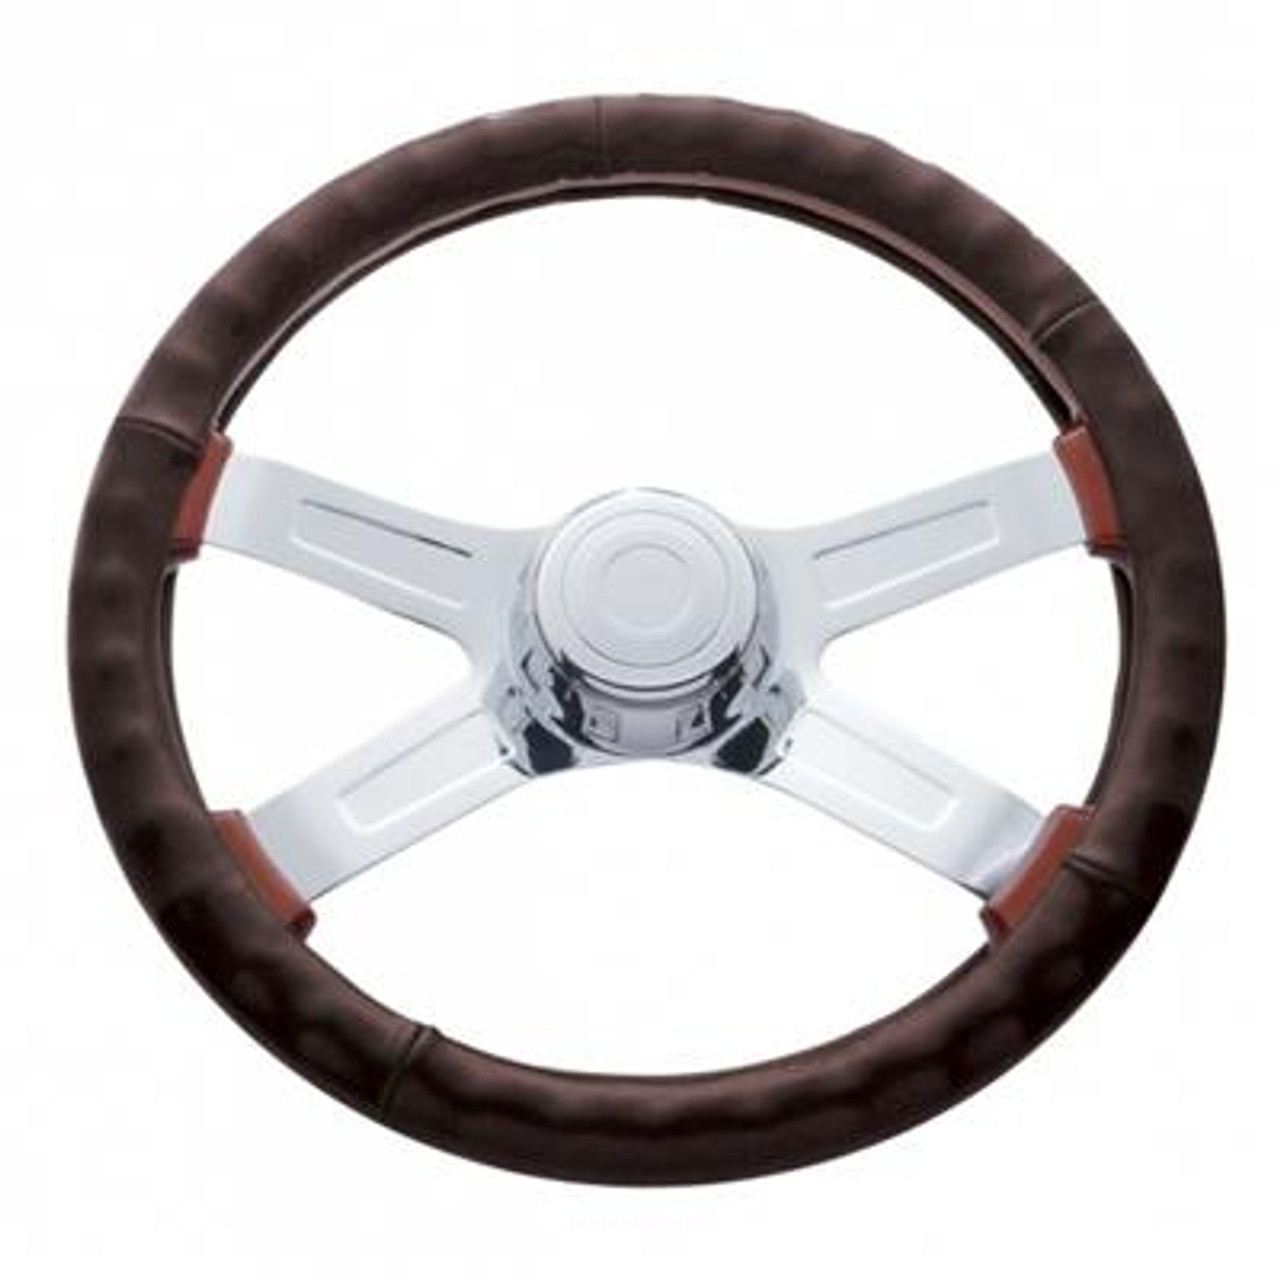 Thanks to United Pacific, you have all kinds of steering wheels to choose from - to wood, chrome, to all the colors of the rainbow. We also carry a variety of steering wheel covers and spinners to help make steering maneuvers easier on you.